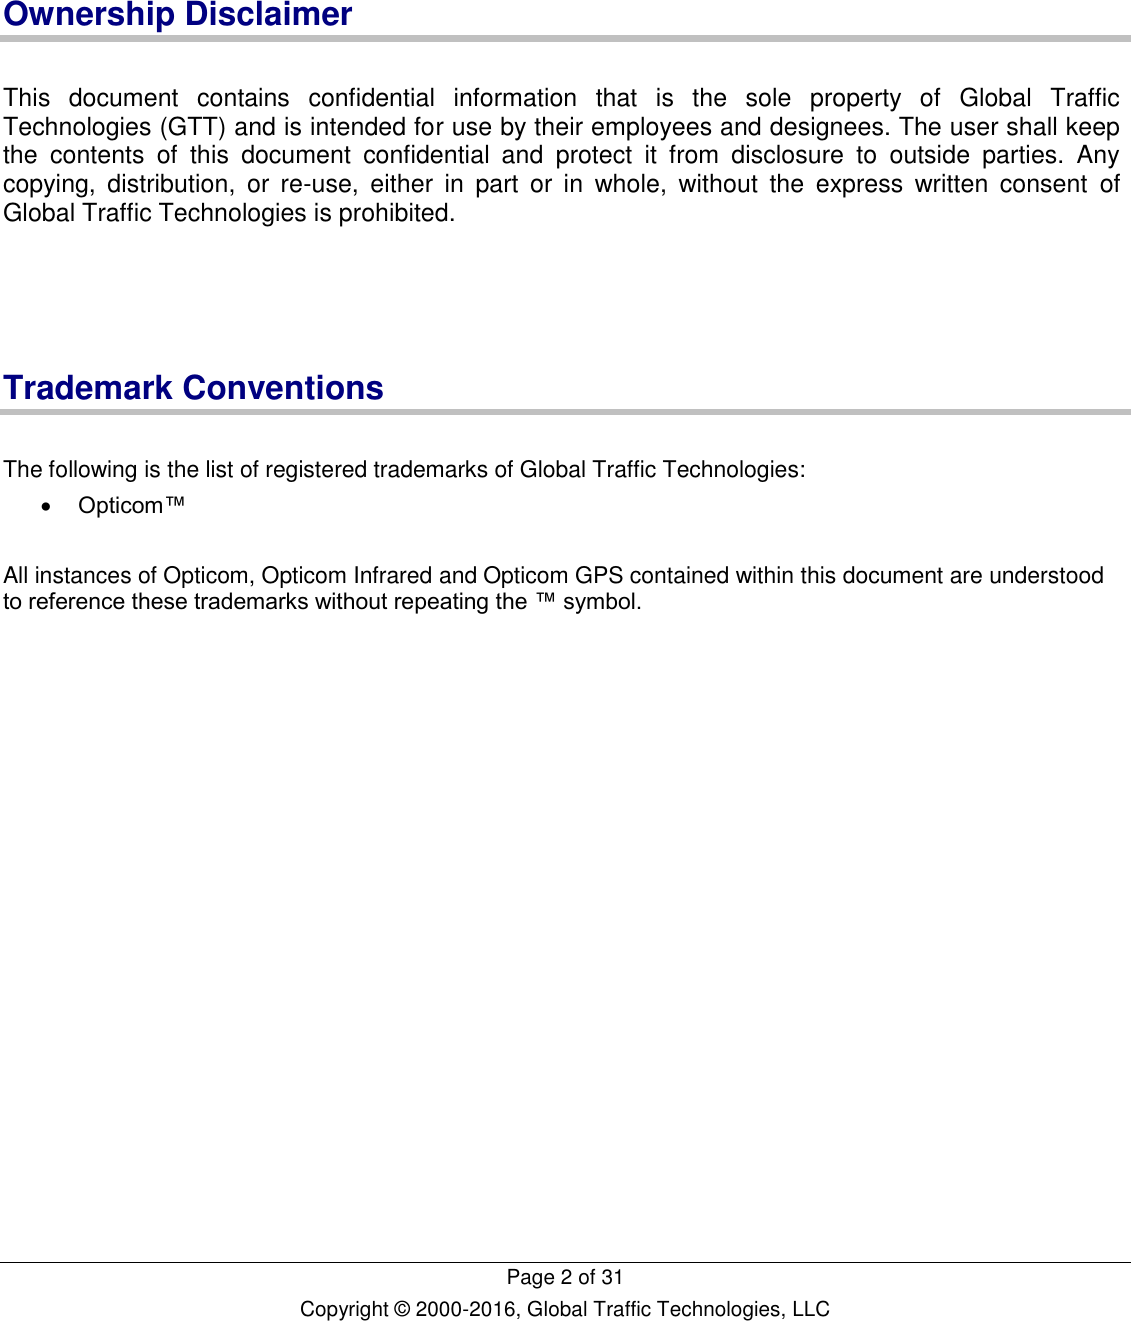   Page 2 of 31 Copyright © 2000-2016, Global Traffic Technologies, LLC    Ownership Disclaimer  This  document  contains  confidential  information  that  is  the  sole  property  of  Global  Traffic Technologies (GTT) and is intended for use by their employees and designees. The user shall keep the  contents  of  this  document  confidential  and  protect  it  from  disclosure  to  outside  parties.  Any copying,  distribution,  or  re-use,  either  in  part  or  in  whole,  without  the  express  written  consent  of Global Traffic Technologies is prohibited.     Trademark Conventions  The following is the list of registered trademarks of Global Traffic Technologies:  Opticom™  All instances of Opticom, Opticom Infrared and Opticom GPS contained within this document are understood to reference these trademarks without repeating the ™ symbol.    